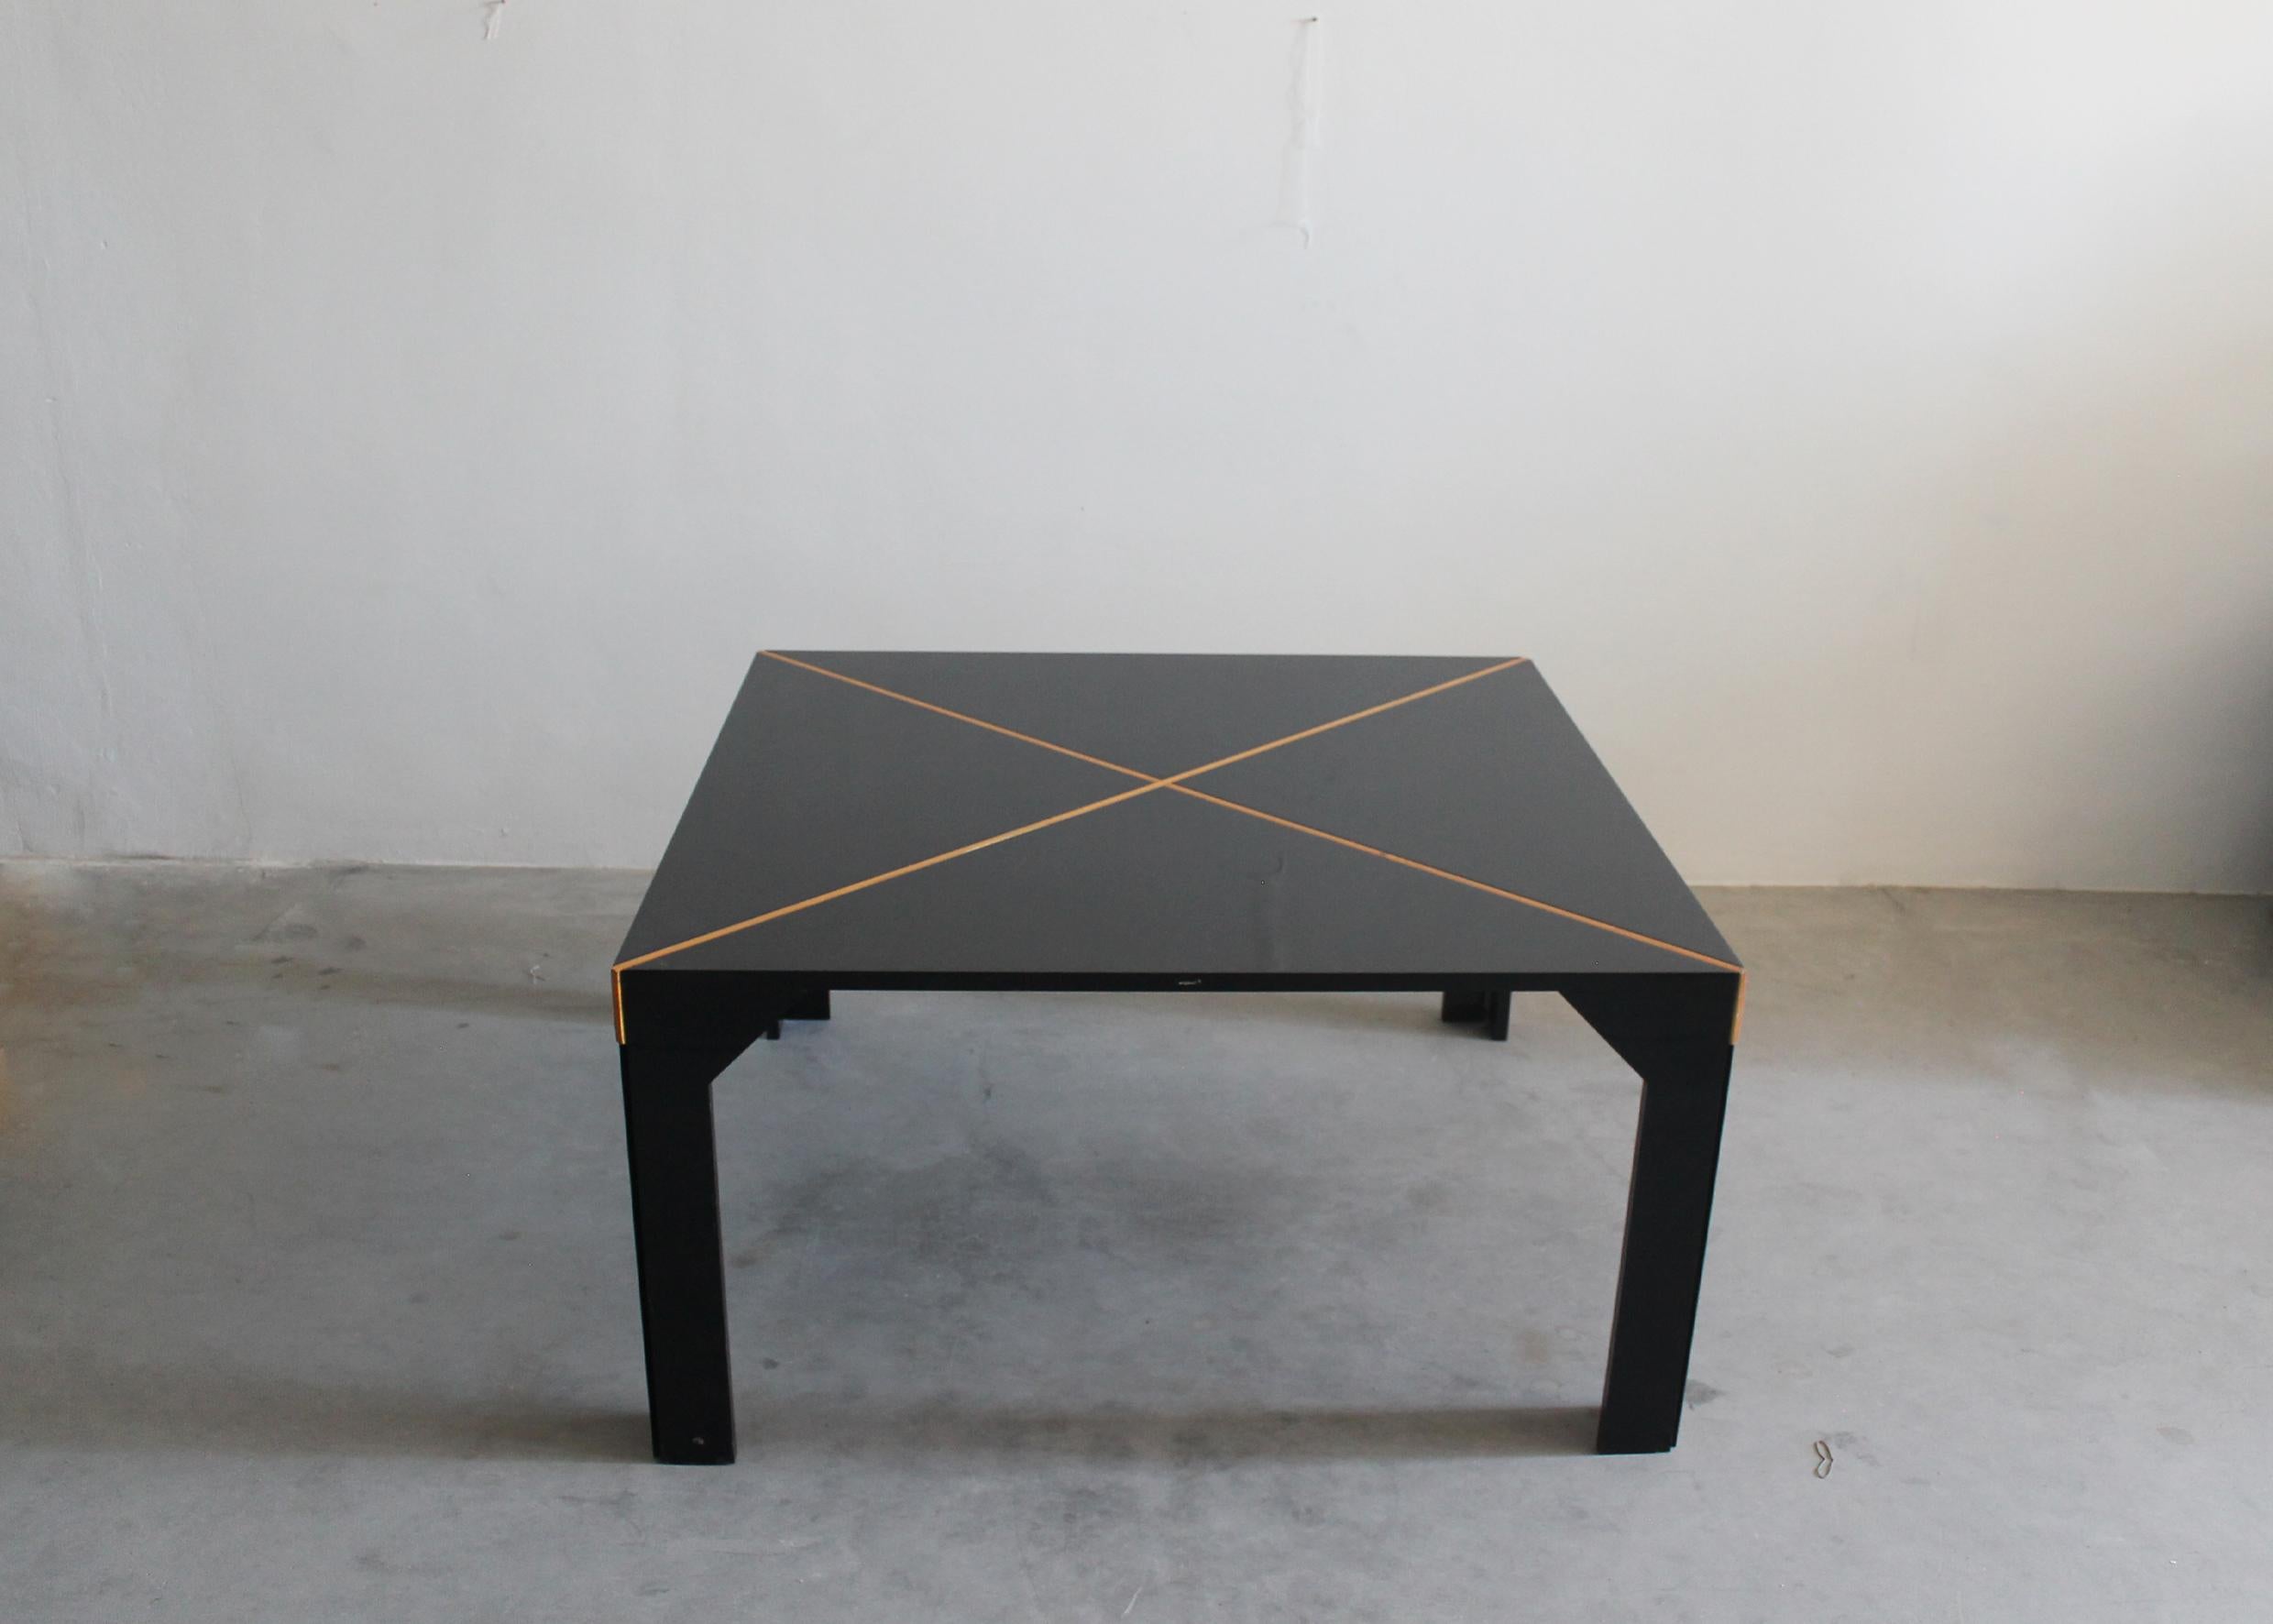 Square table model Tema with structure in black lacquered wood and diagonal inserts in natural spruce on top.
Designed by Vico Magistretti and produced by B&B, 1973, Italy. 

Licterature: Un'industria per il design, La ricerca i designers